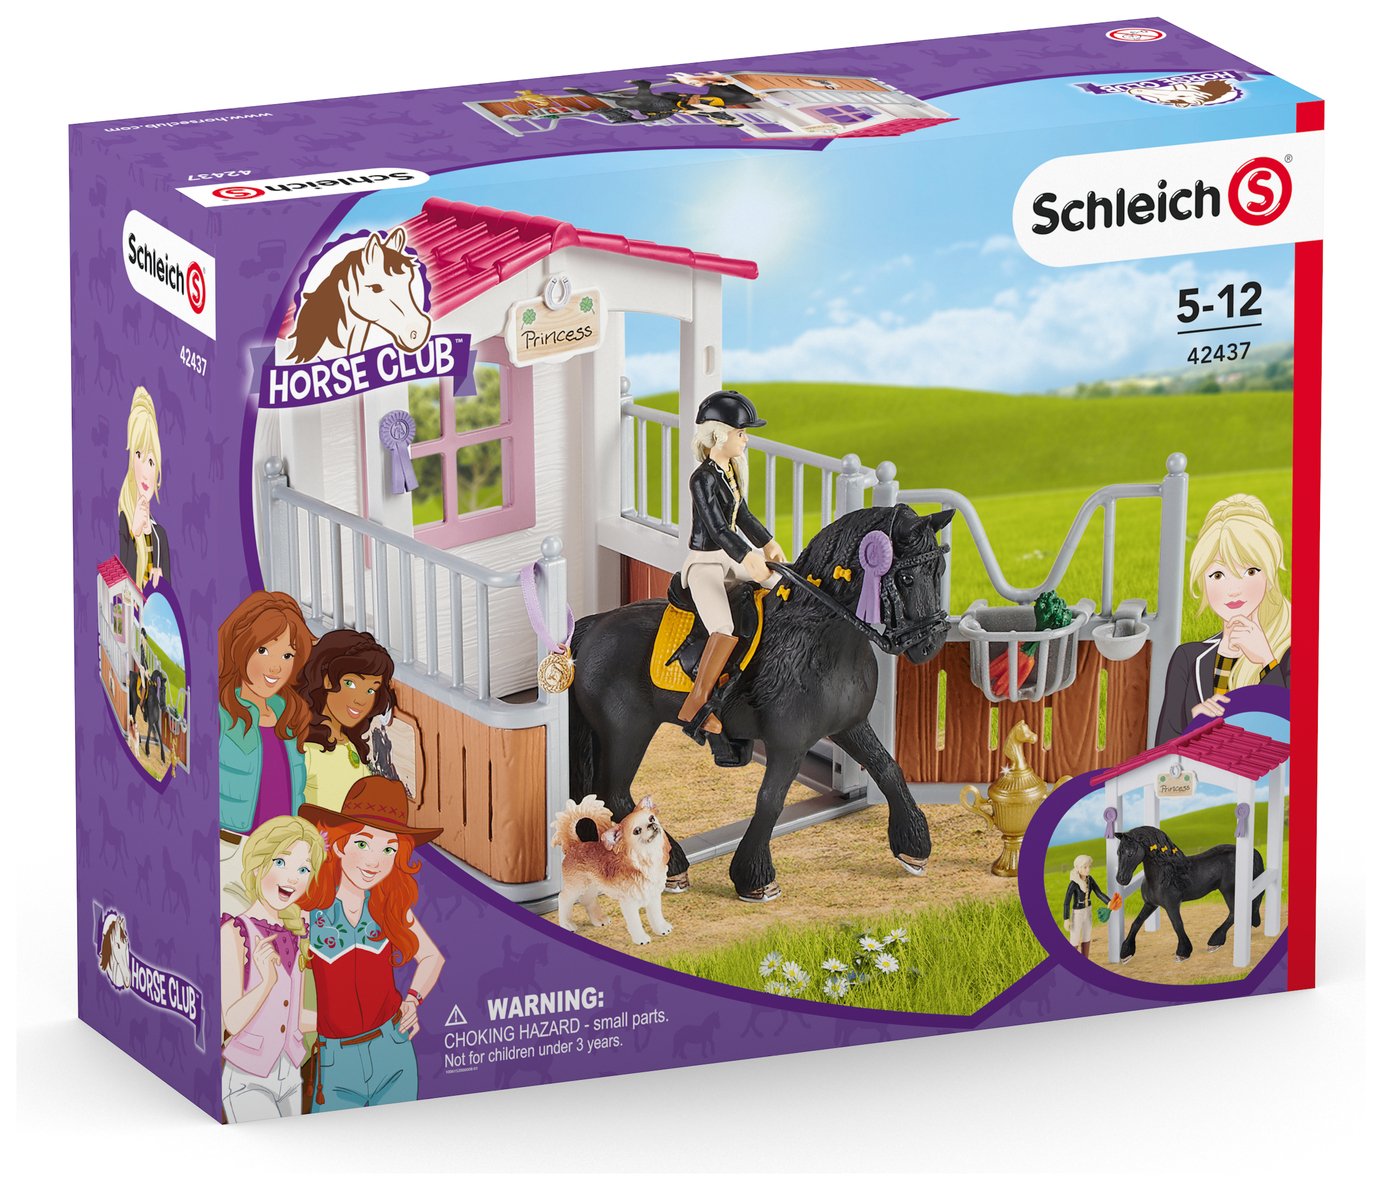 Schleich Horse Club Tori and Princess review